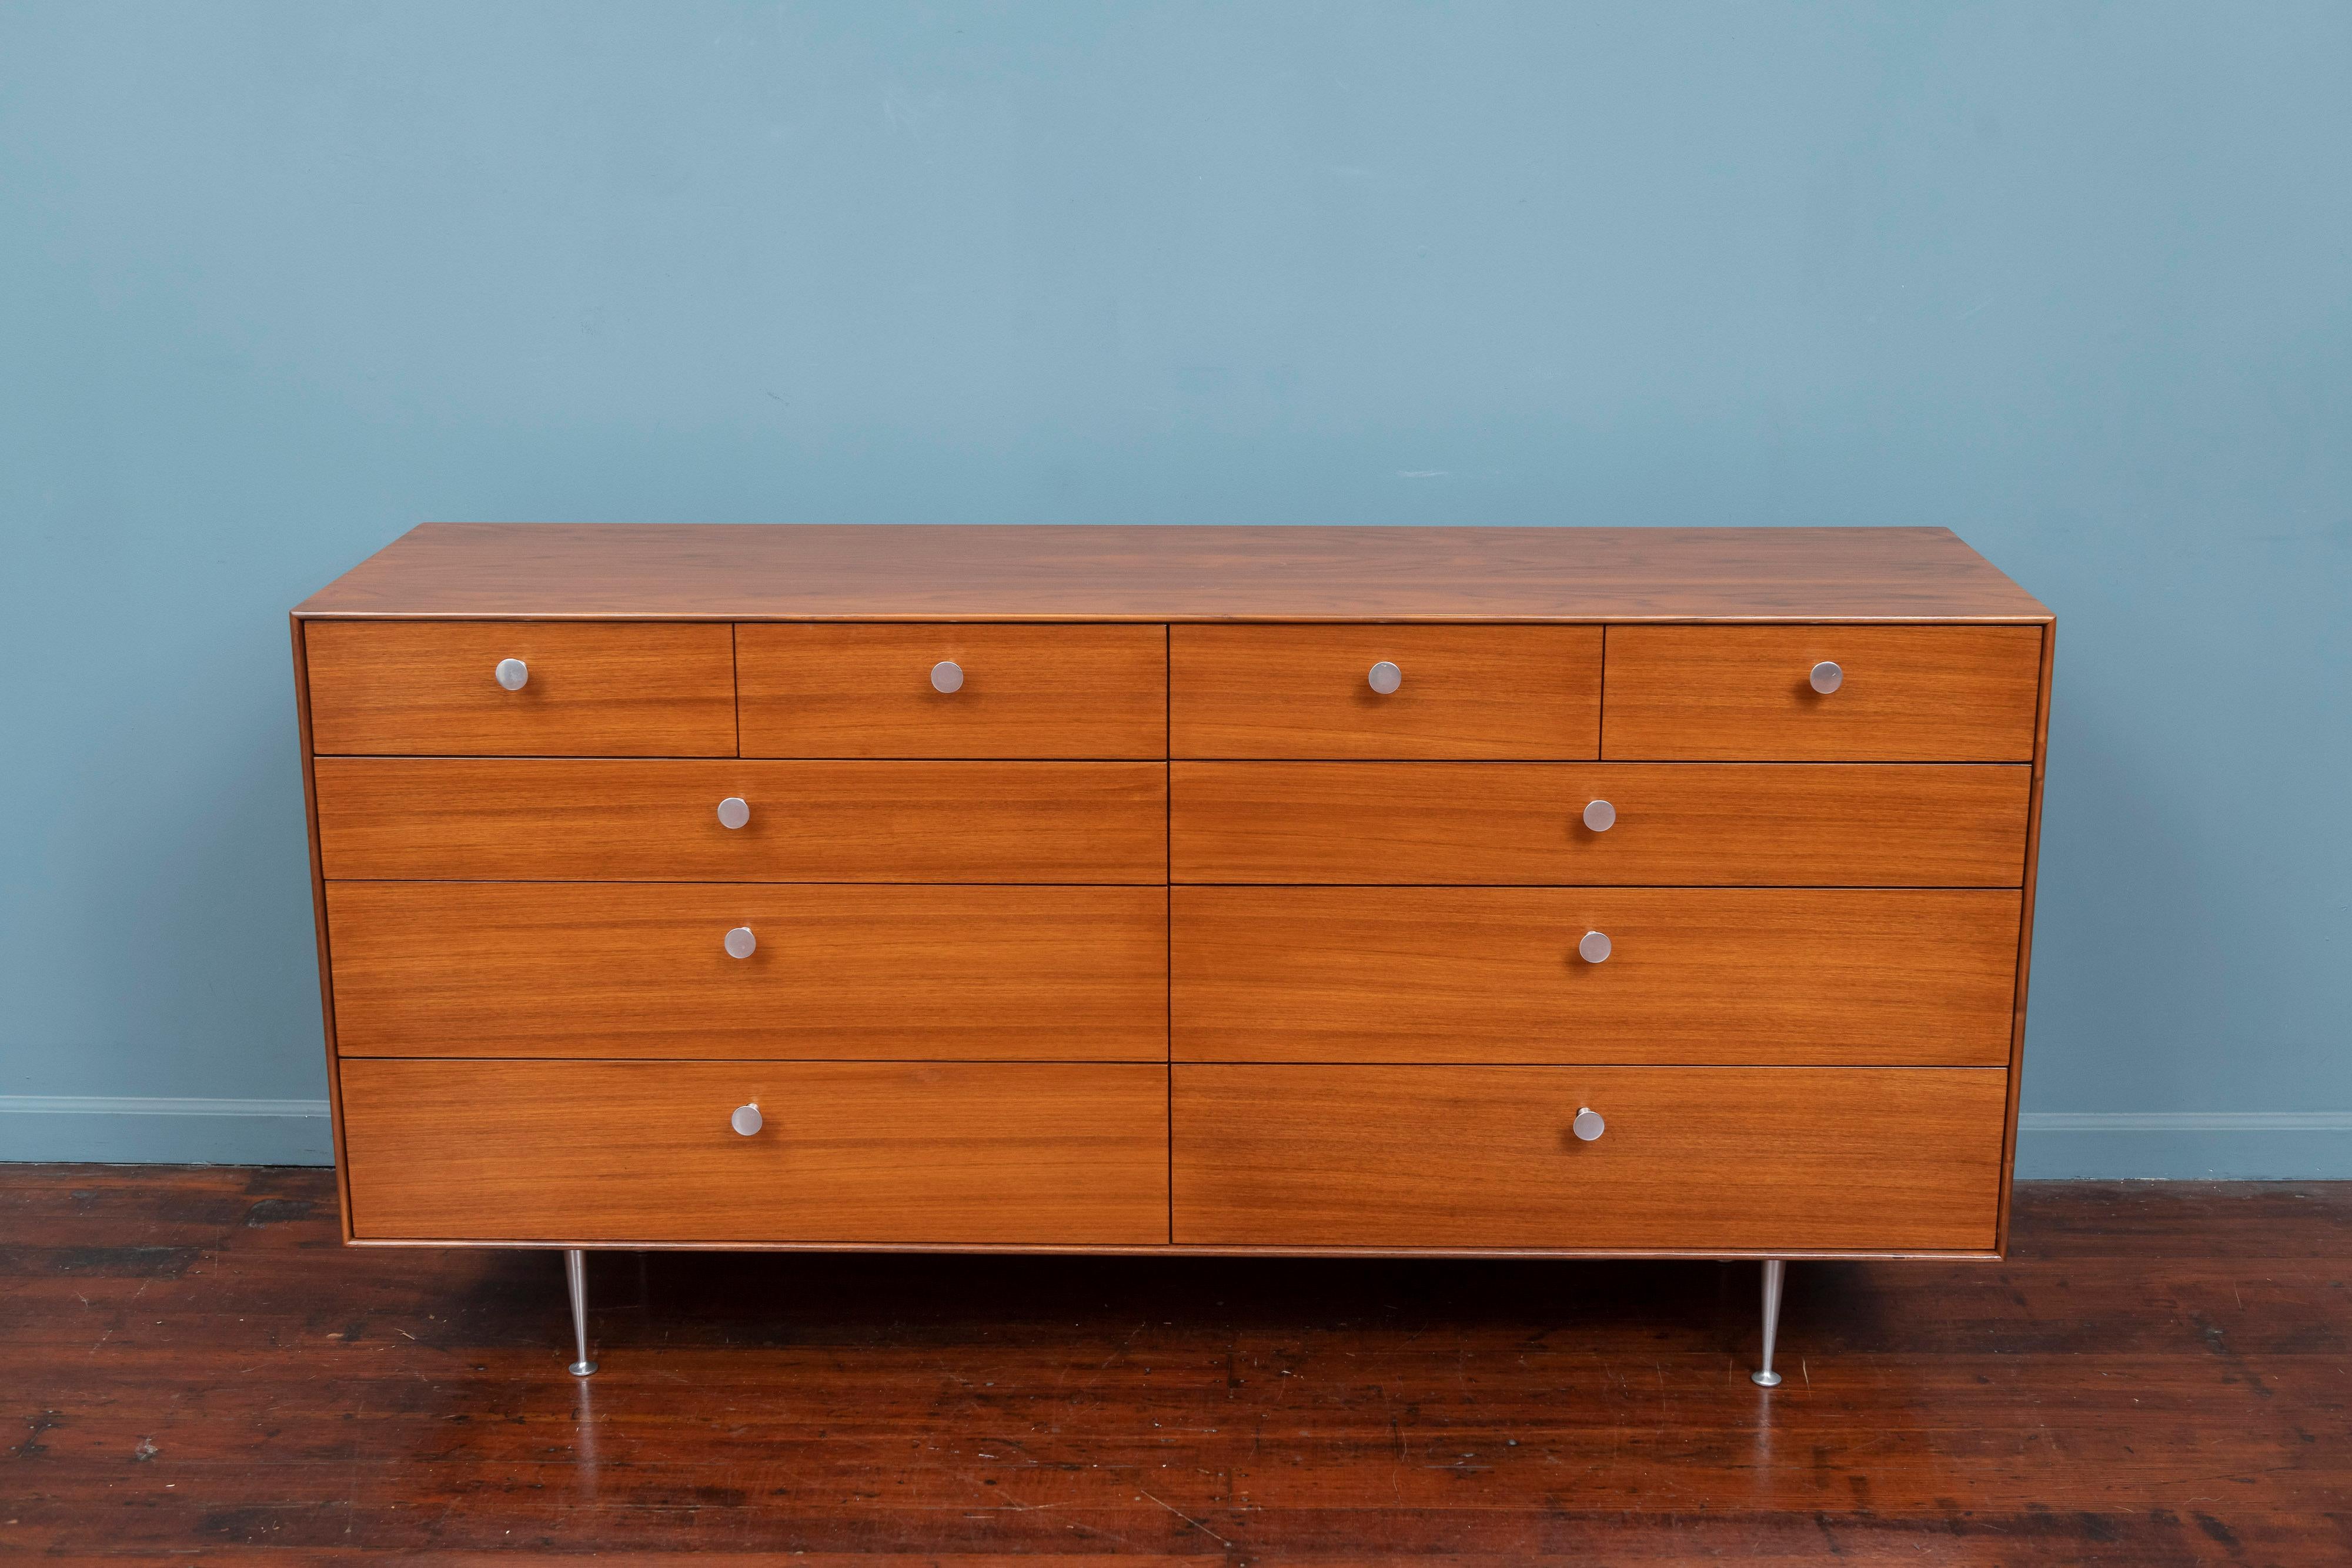 George Nelson design Thin Edge series ten drawer dresser for Herman Miller Furniture Co. An iconic and some might say the best looking and made dresser available then and now. Originally designed as a double dresser for two outfitted with drawer